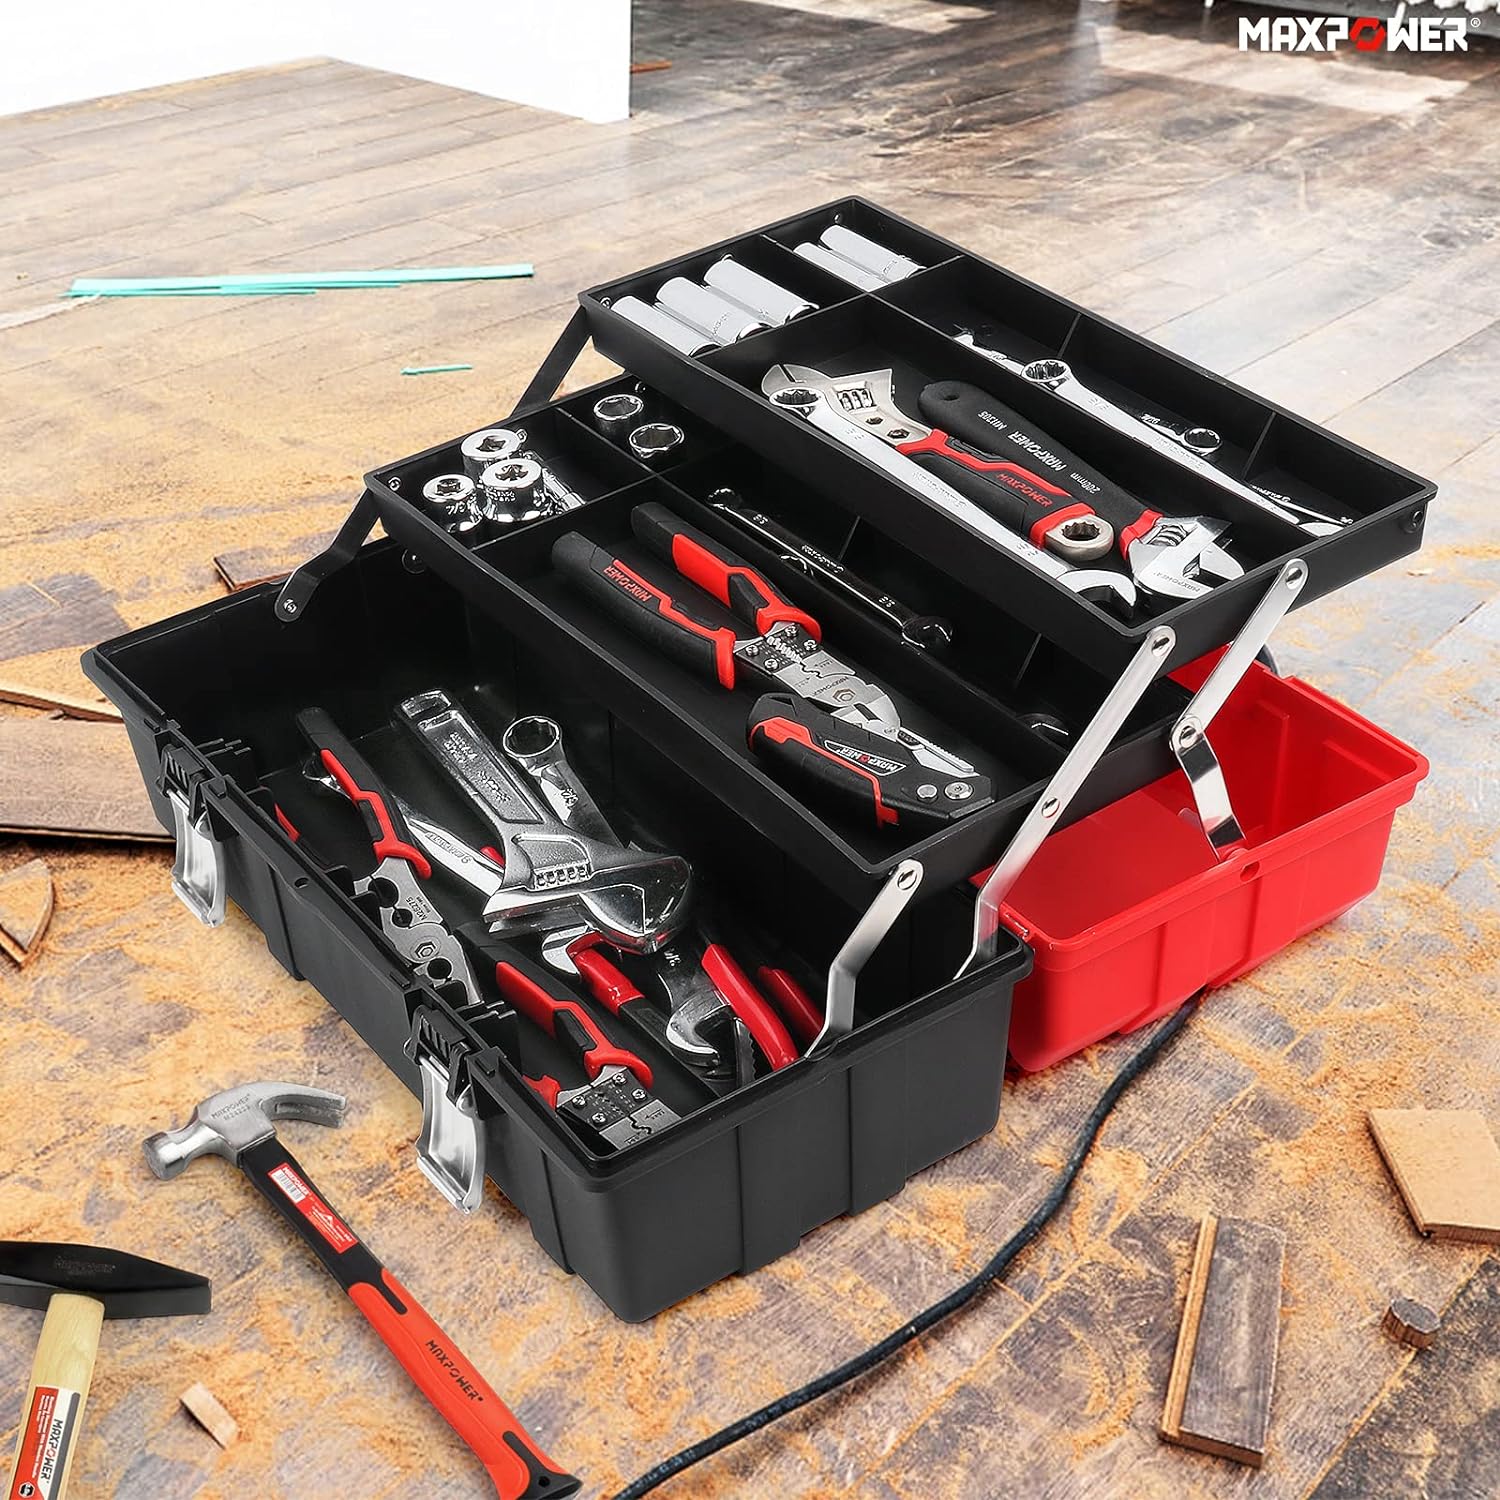 MAXPOWER 17-Inch Tool Box, Three-Layer Folding Plastic Storage Toolbox,  Multi-Function Organizer with Tray and Dividers